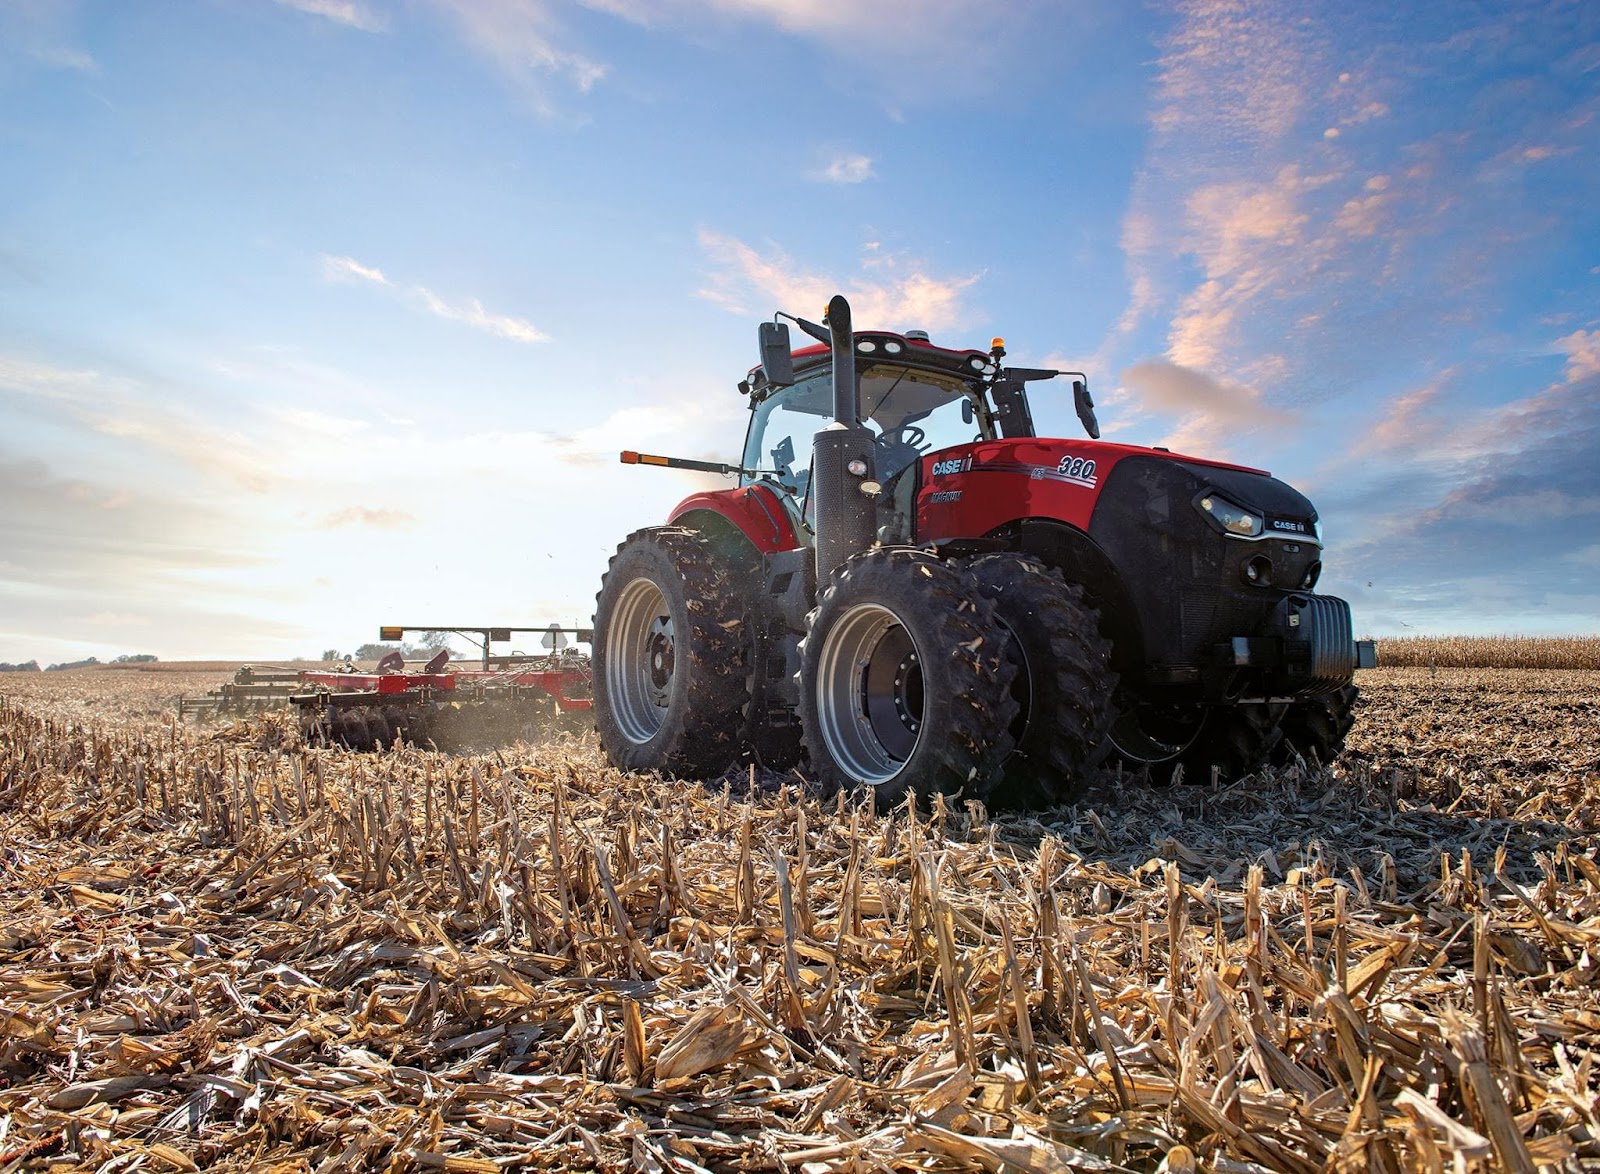 Image of a Case IH Magnum Series tractor.